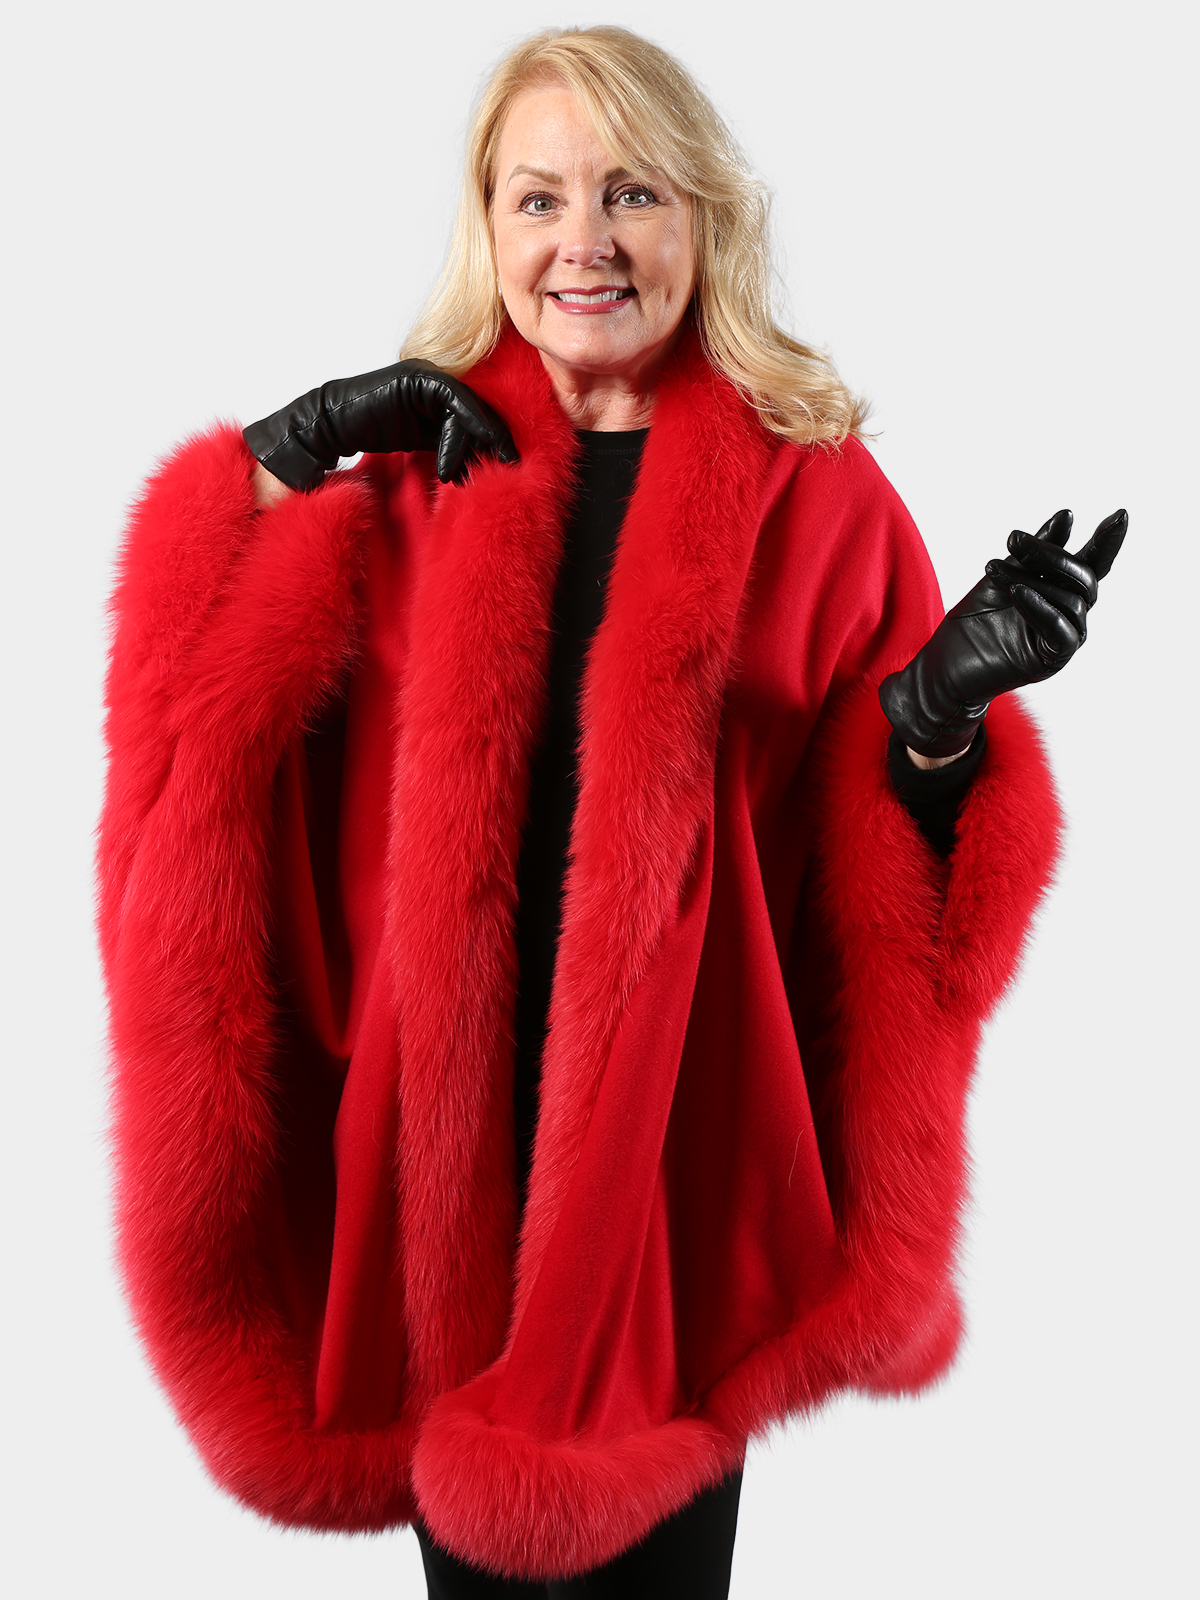 Red Fur Cape with Fox Fur Trim - furoutlet - fur coat, fur jackets, fur  hats, prices subject to change without notice, so order now!